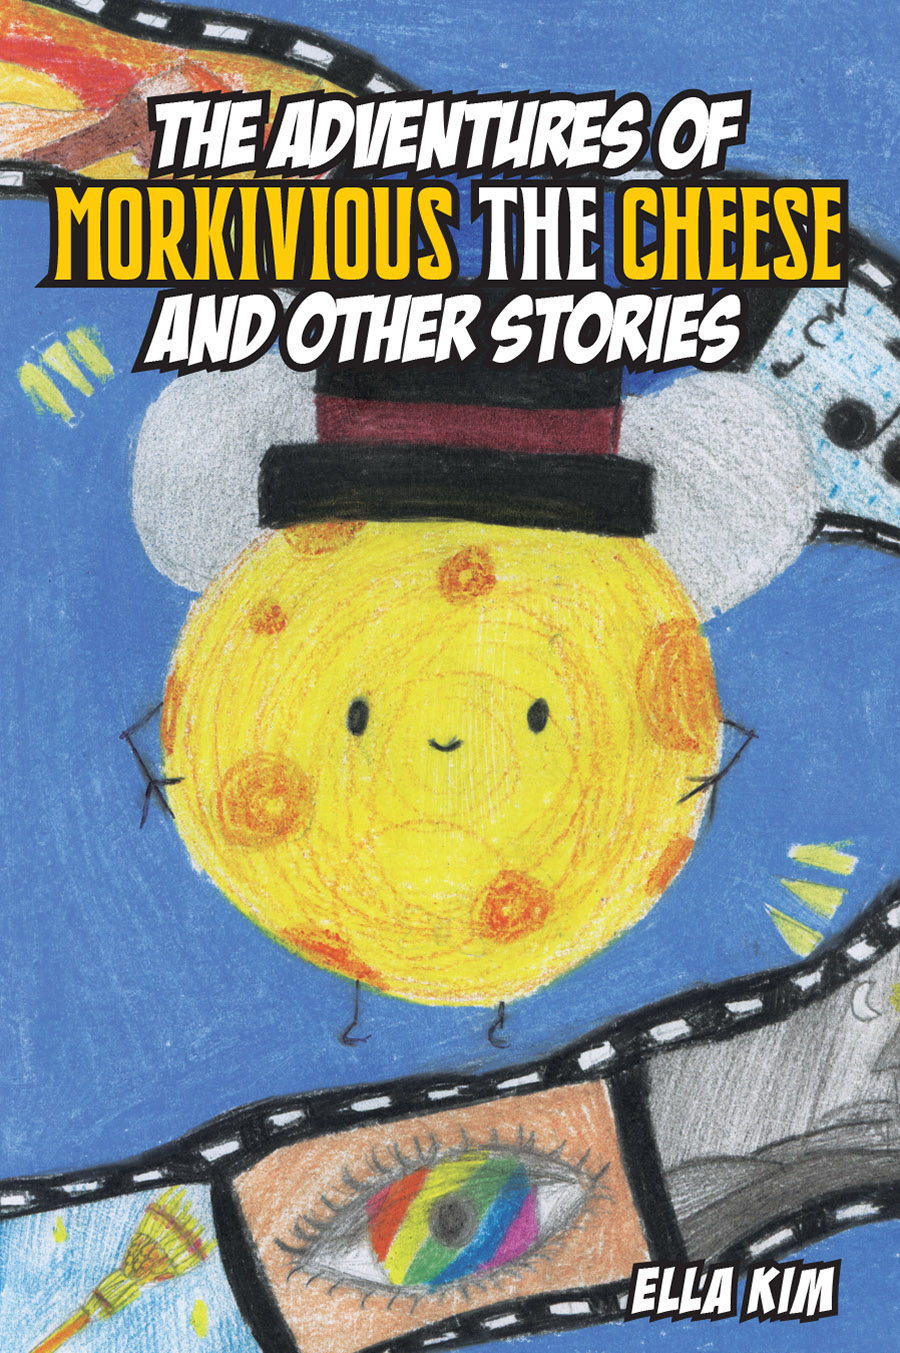 The Adventures of Morkivious the Cheese and Other Stories